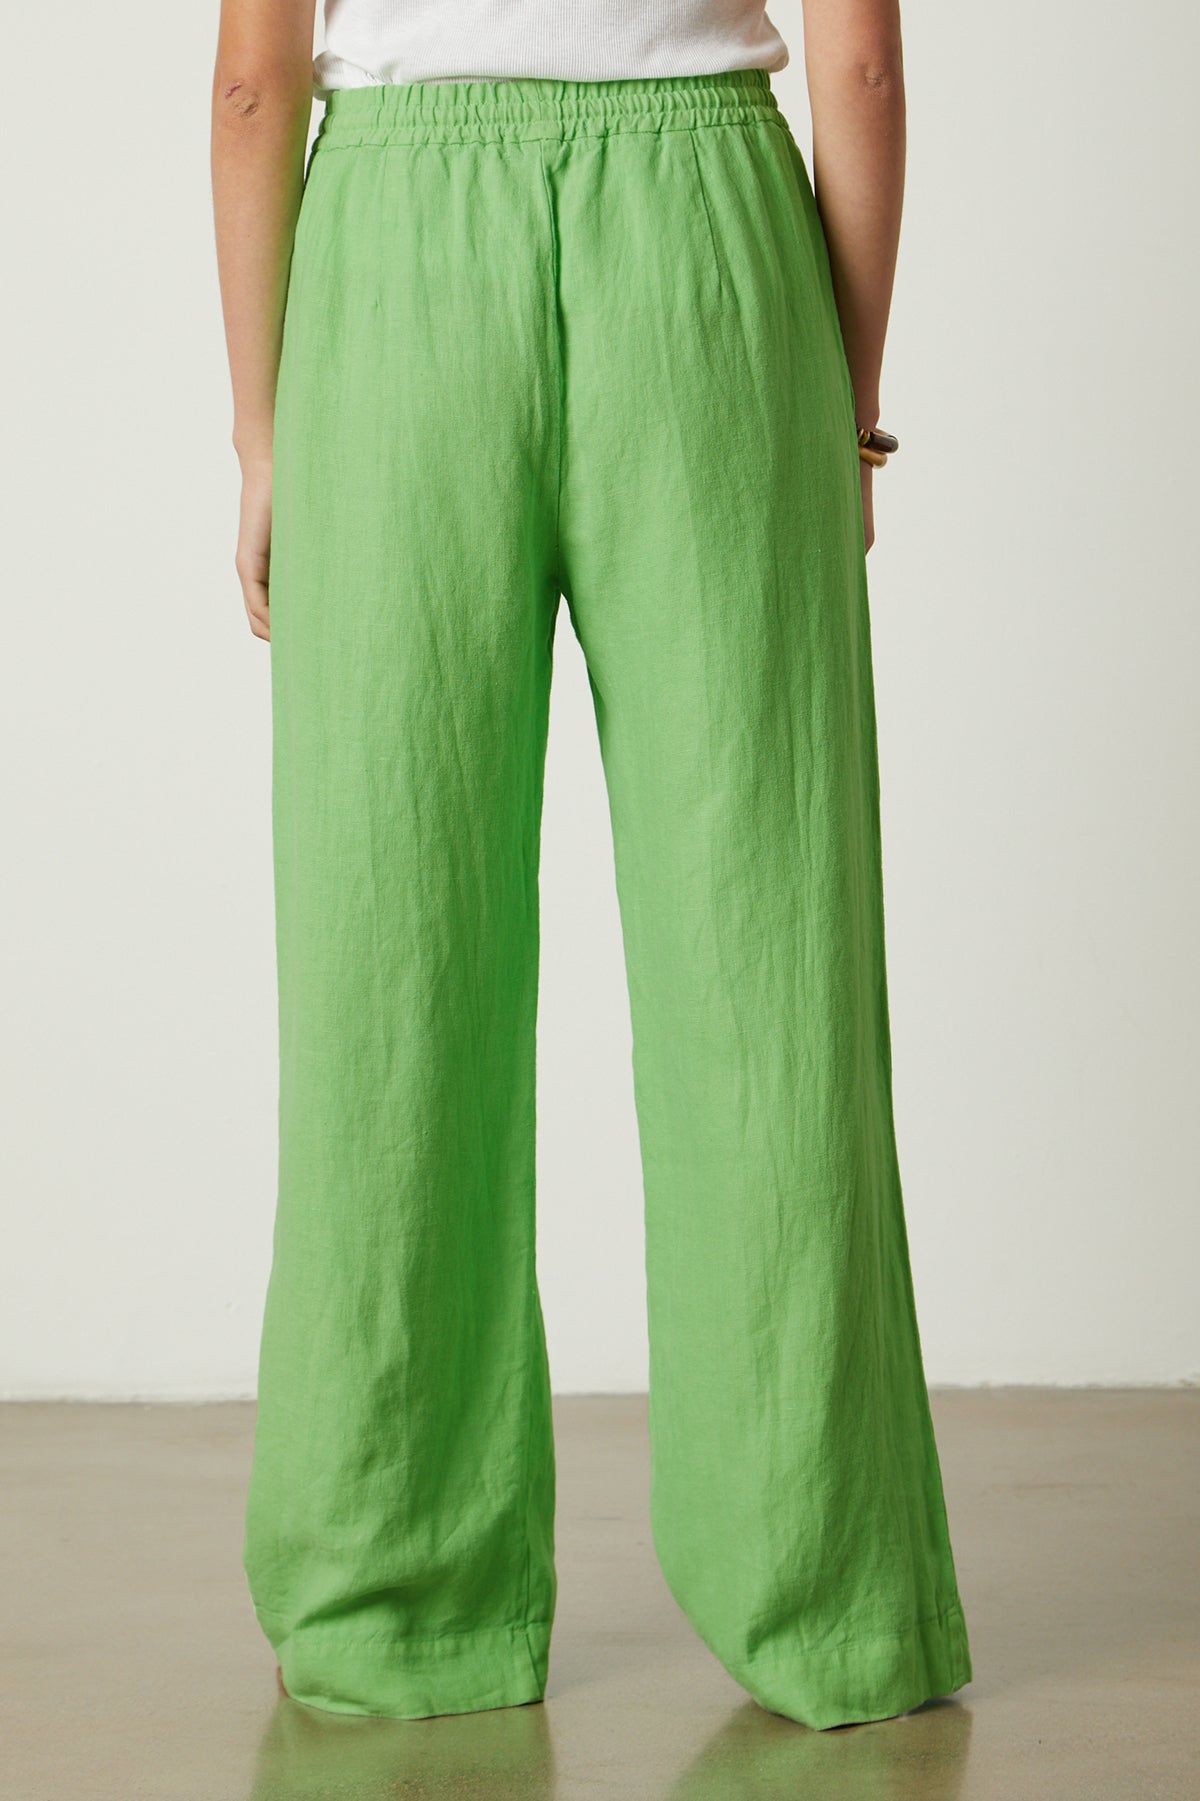 The back view of a woman wearing Velvet by Graham & Spencer's GWYNETH HEAVY LINEN PANT.-35954253693121